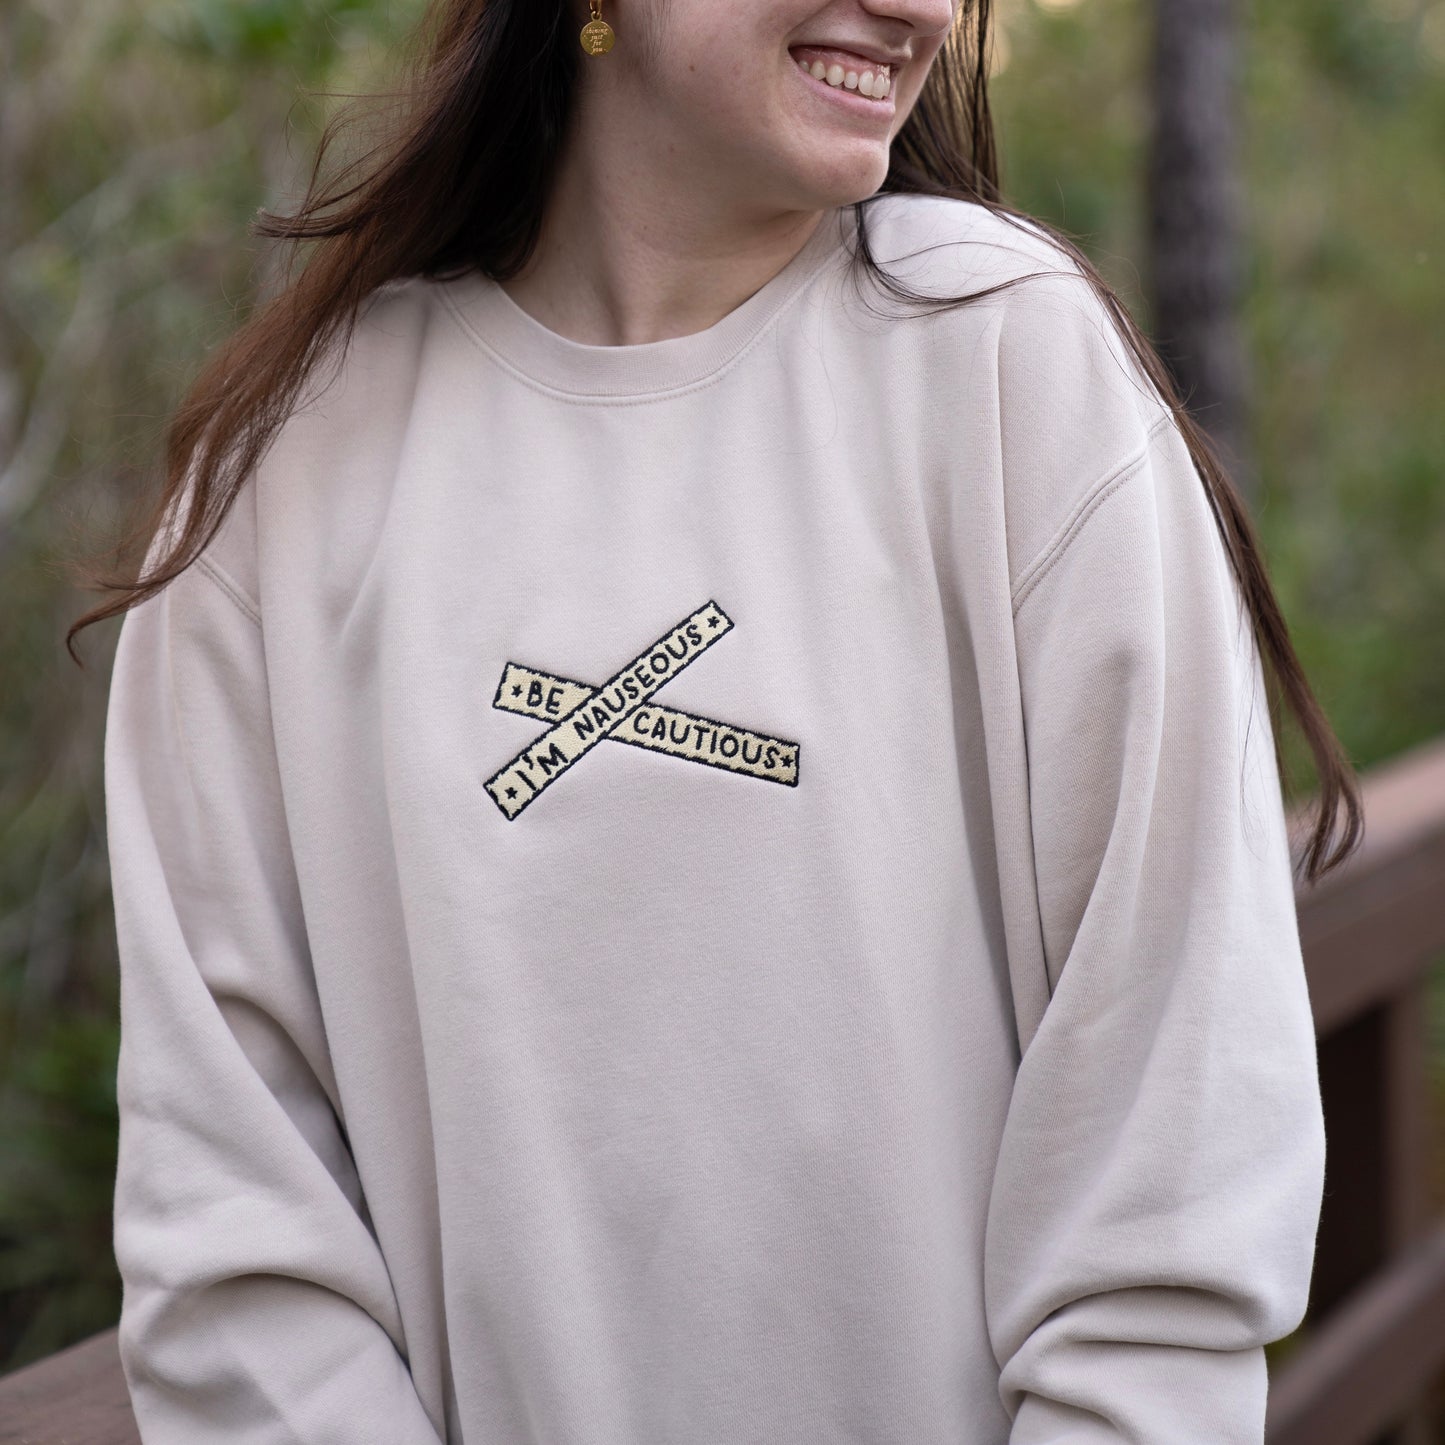 "Be Cautious, I'm Nauseous" embroidered crewneck